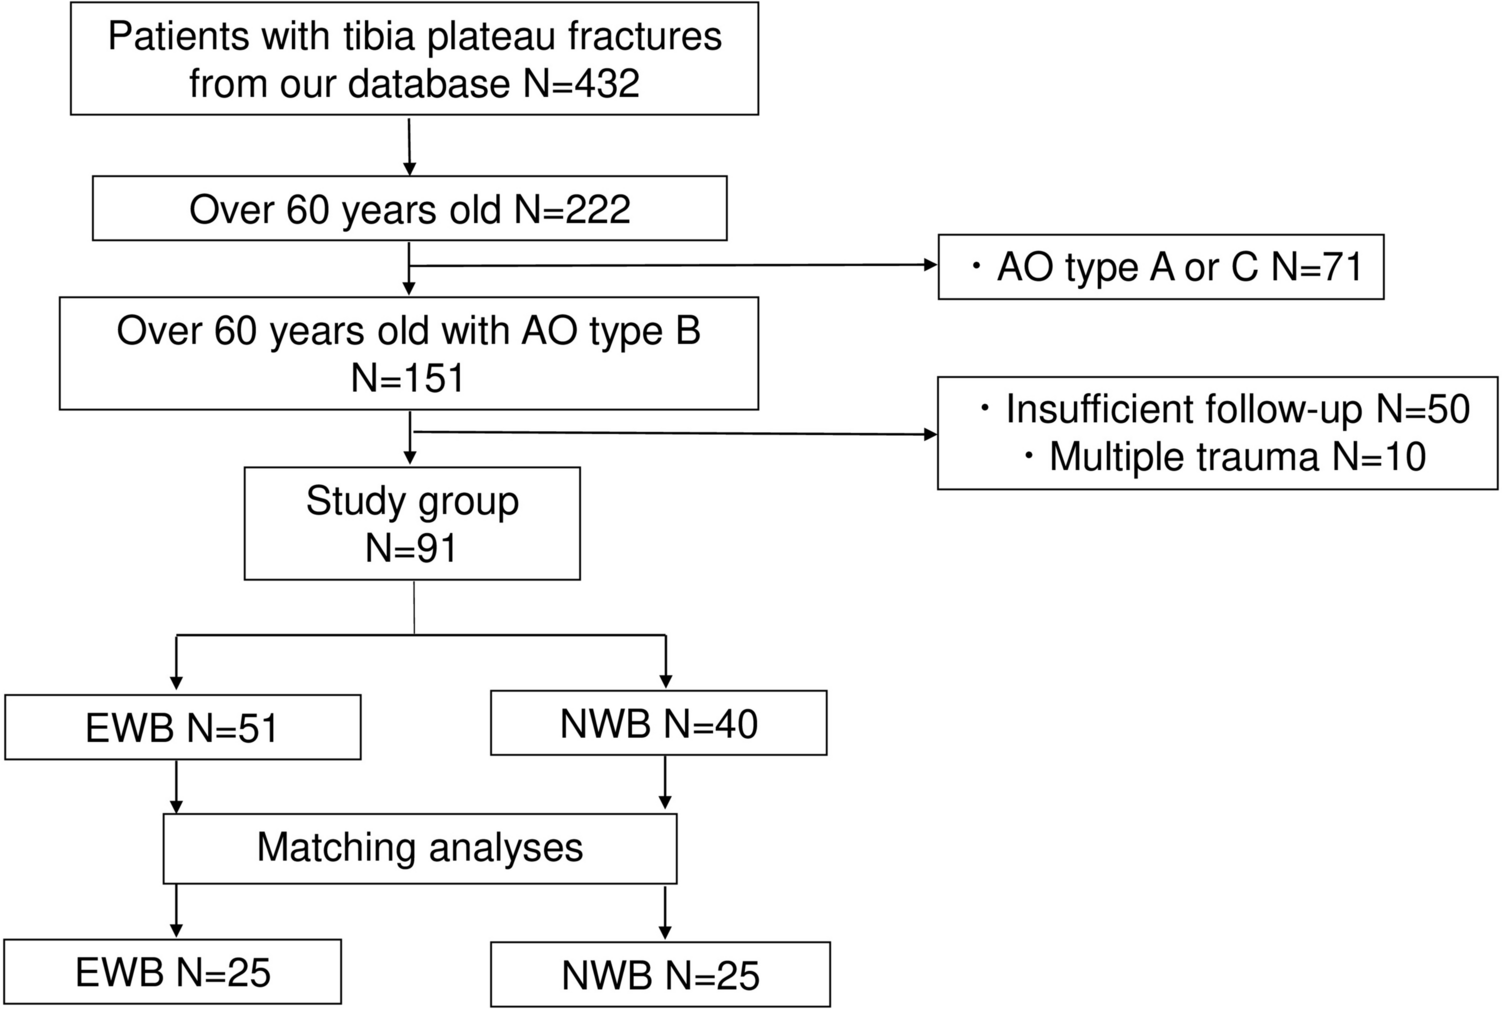 Does Early and Late Weight Bearing Have an Effect on the Results of Elderly Tibial Plateau Fractures with Internal Fixation?: A Multicenter (TRON Group) Study